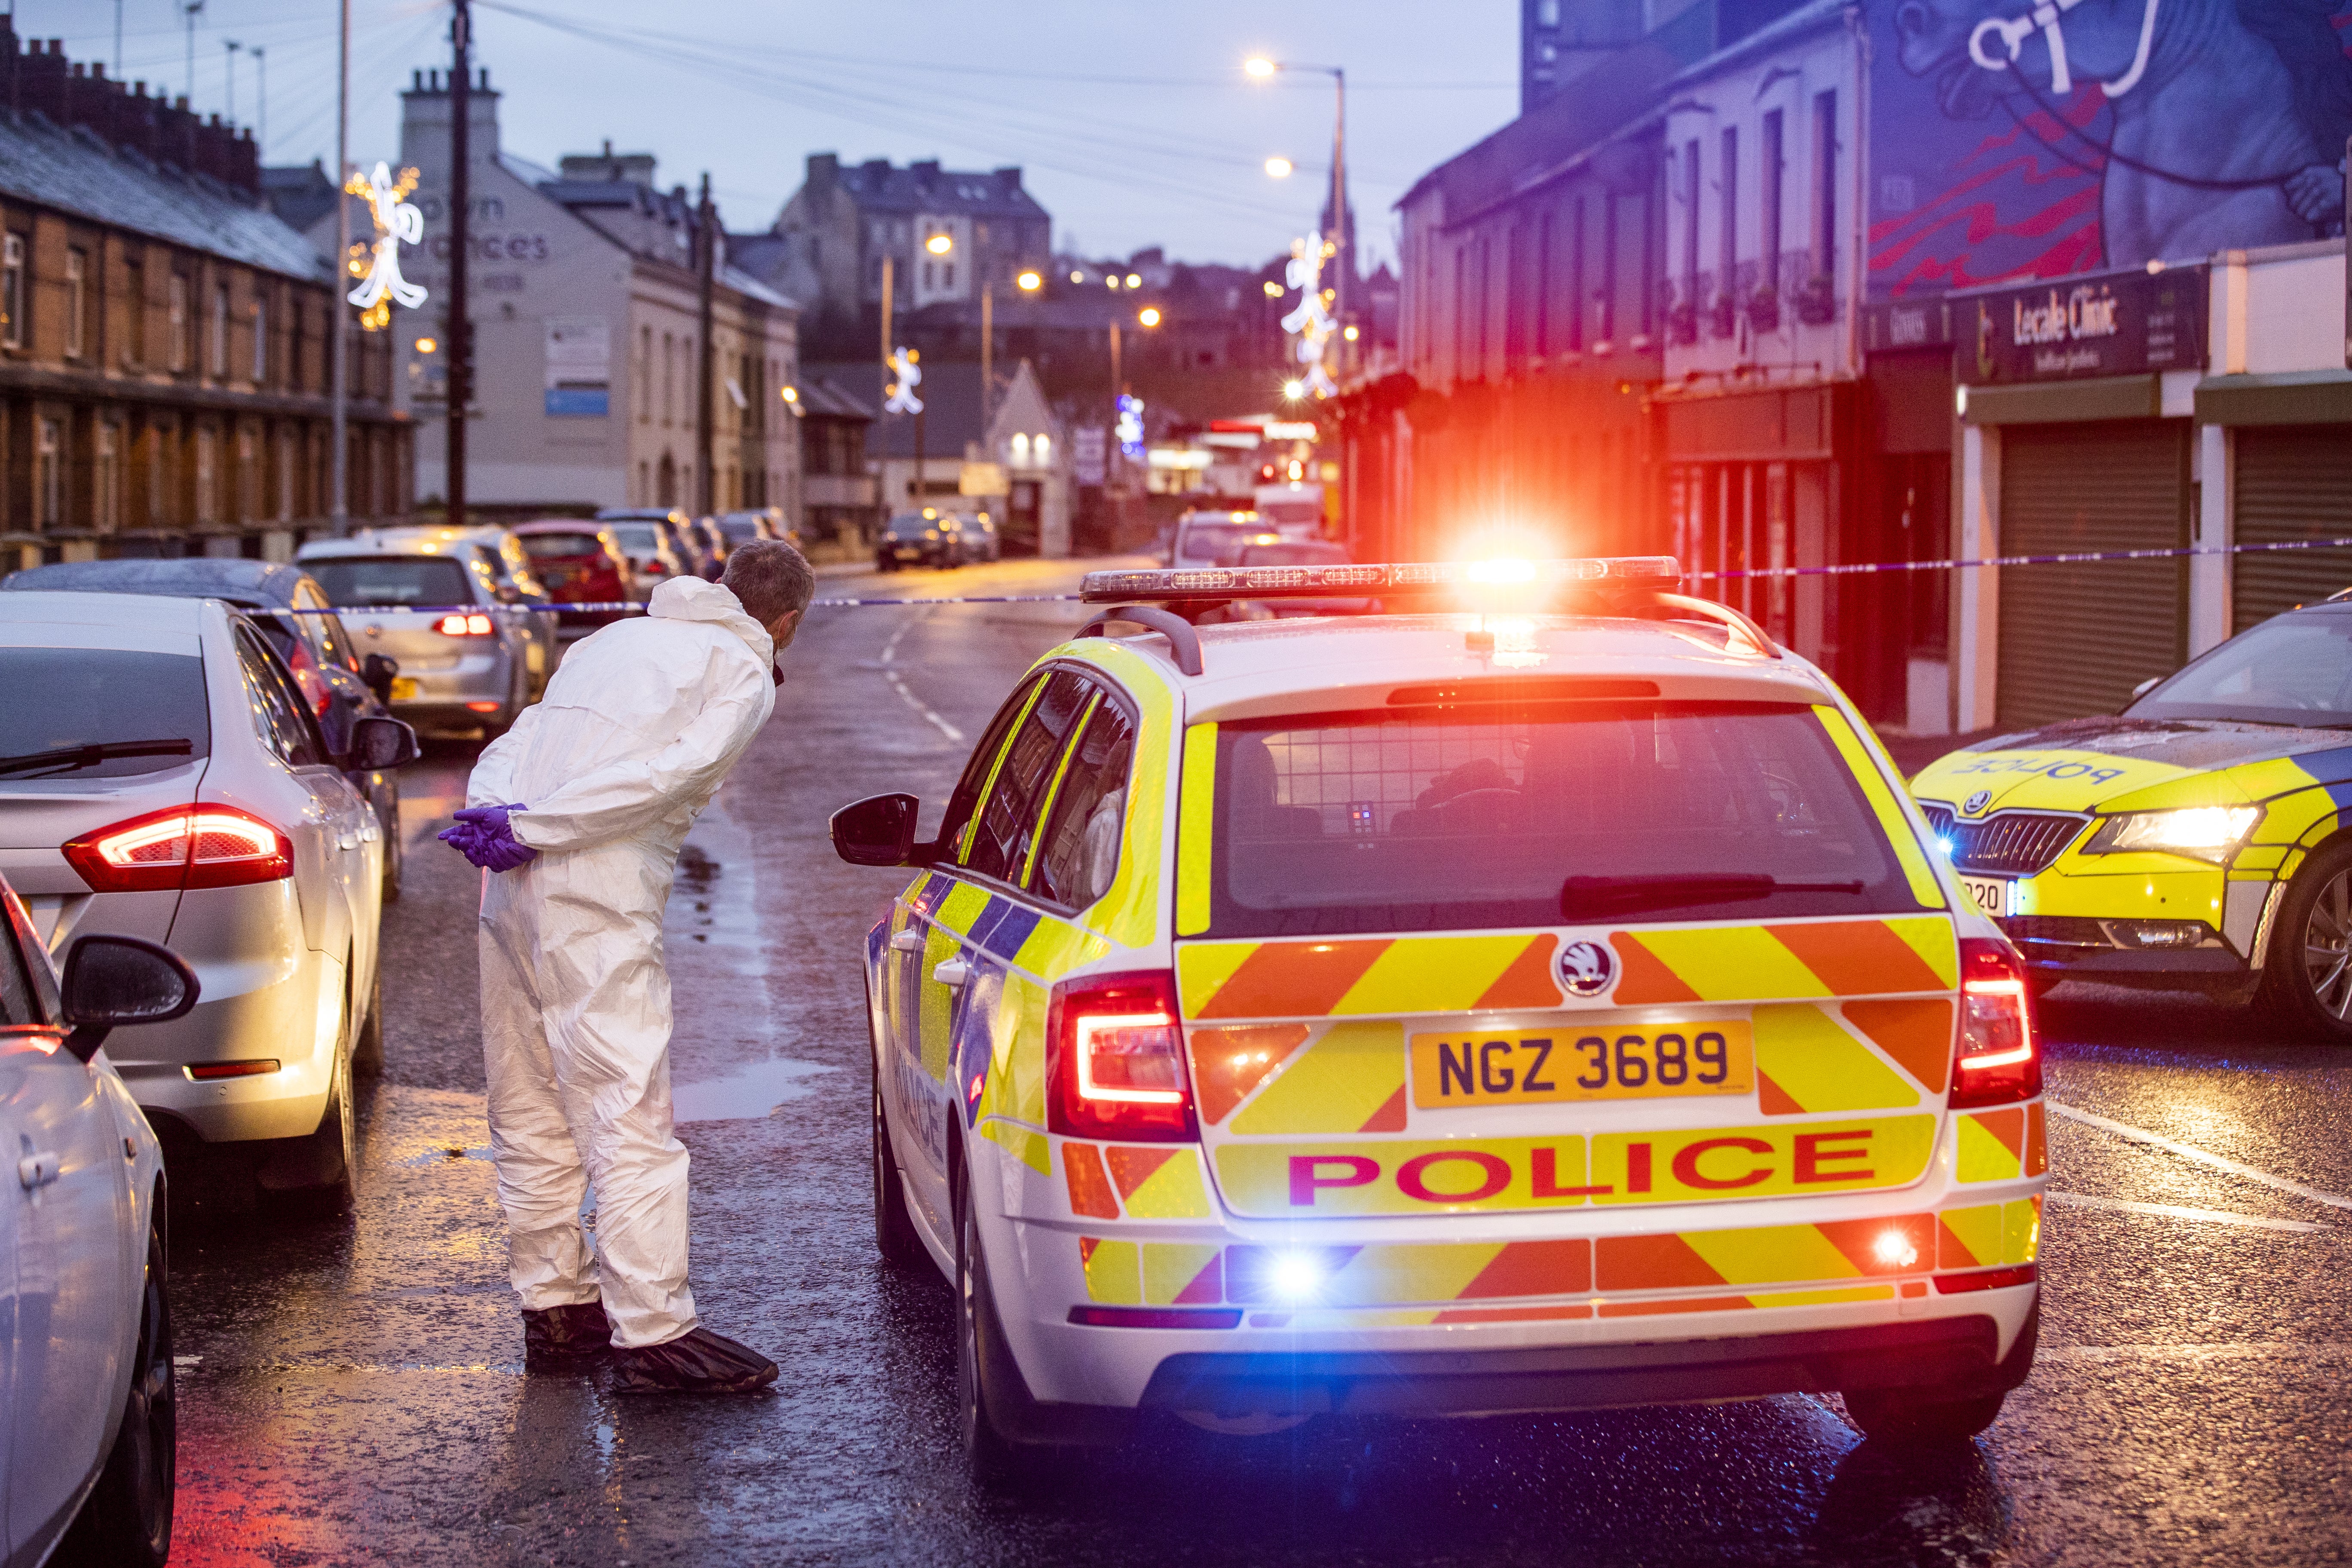 Forensic officers at the scene in Downpatrick, County Down (Liam McBurney/PA)